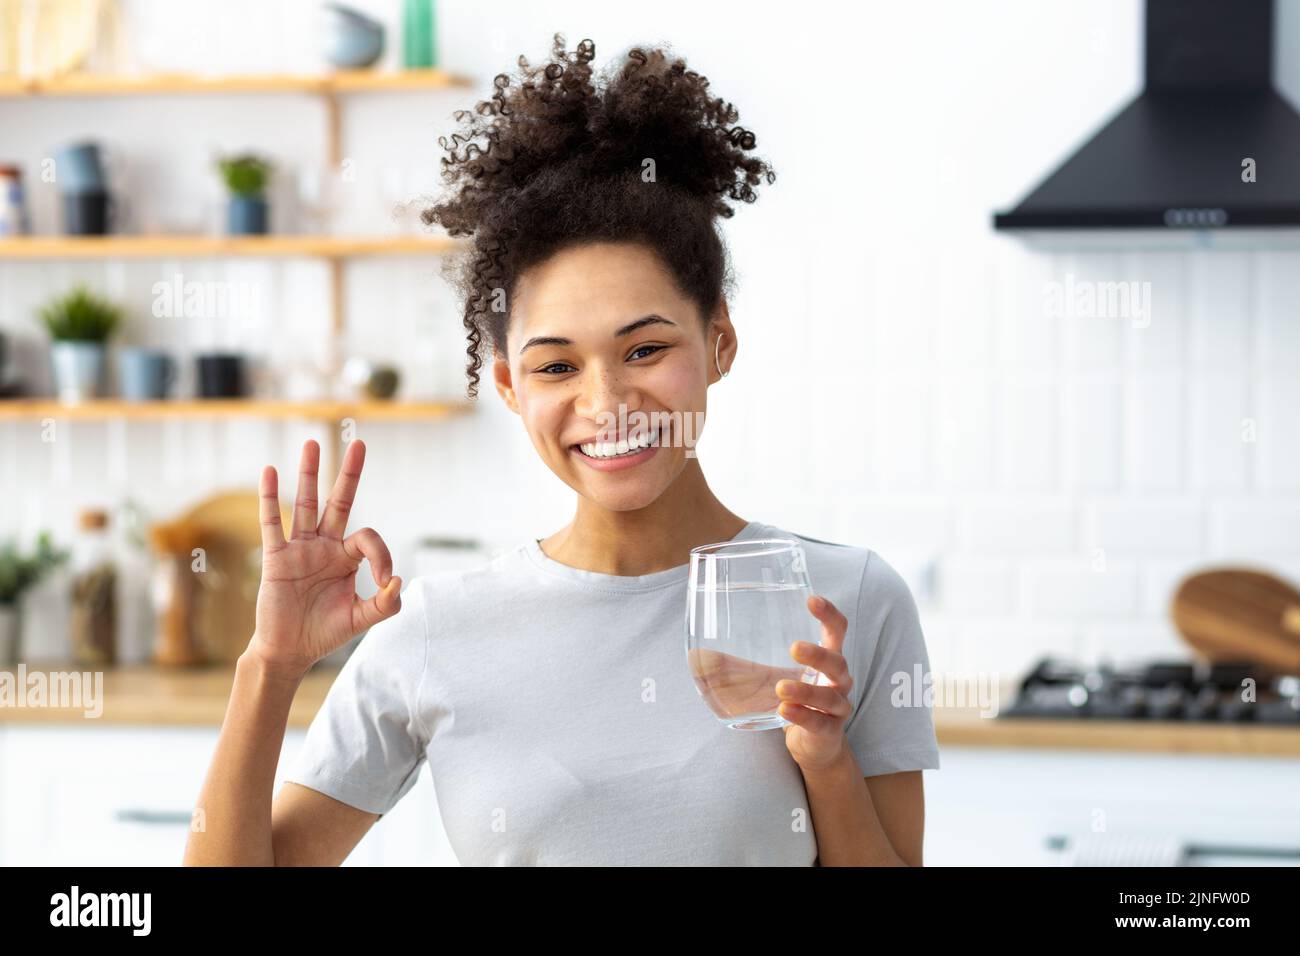 Healthy lifestyle Young woman holding glass of fresh clean water looks at camera smiles friendly Stock Photo